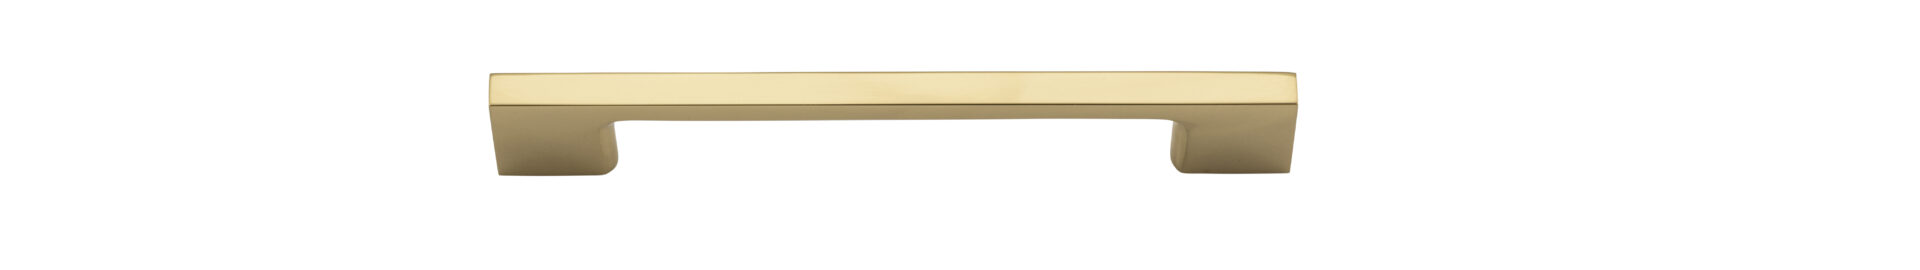 0515 - Cali Cabinet Pull - 128mm - Polished Brass